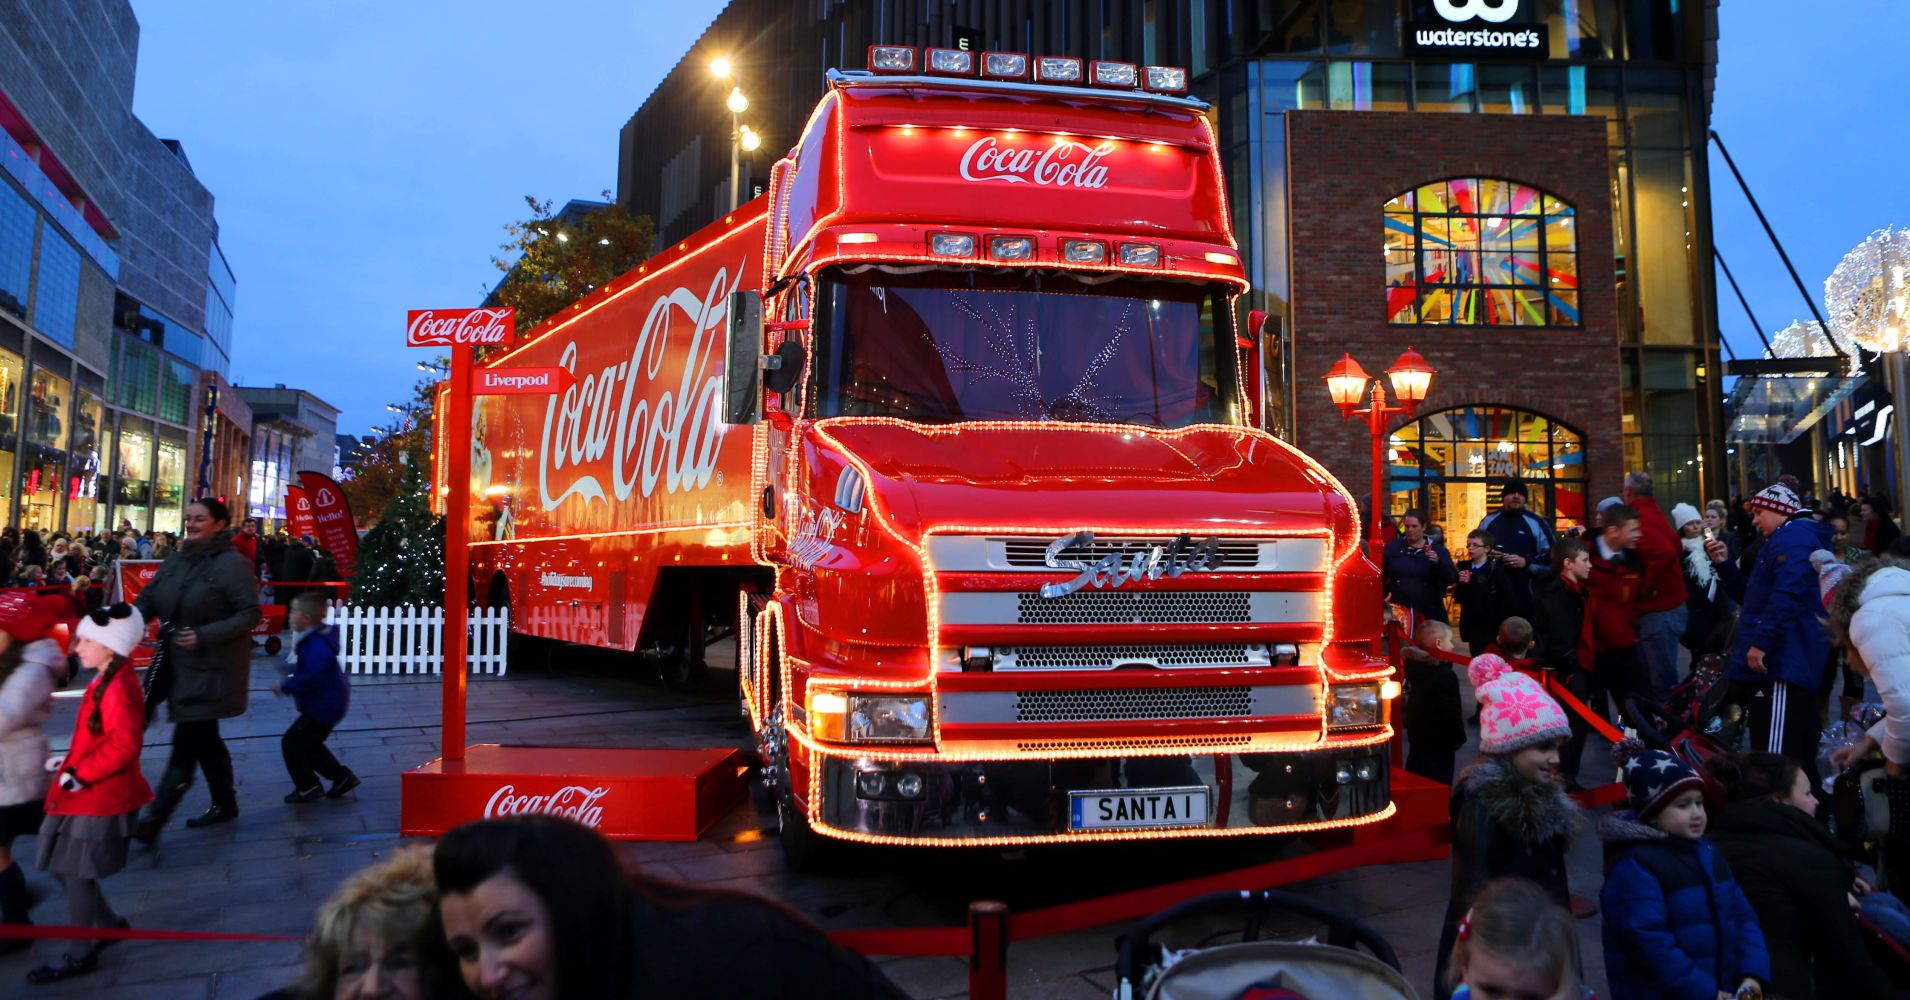 Coca-cola Christmas Truck Tour Scaled Back In The Uk After Backlash From Campaigners photo